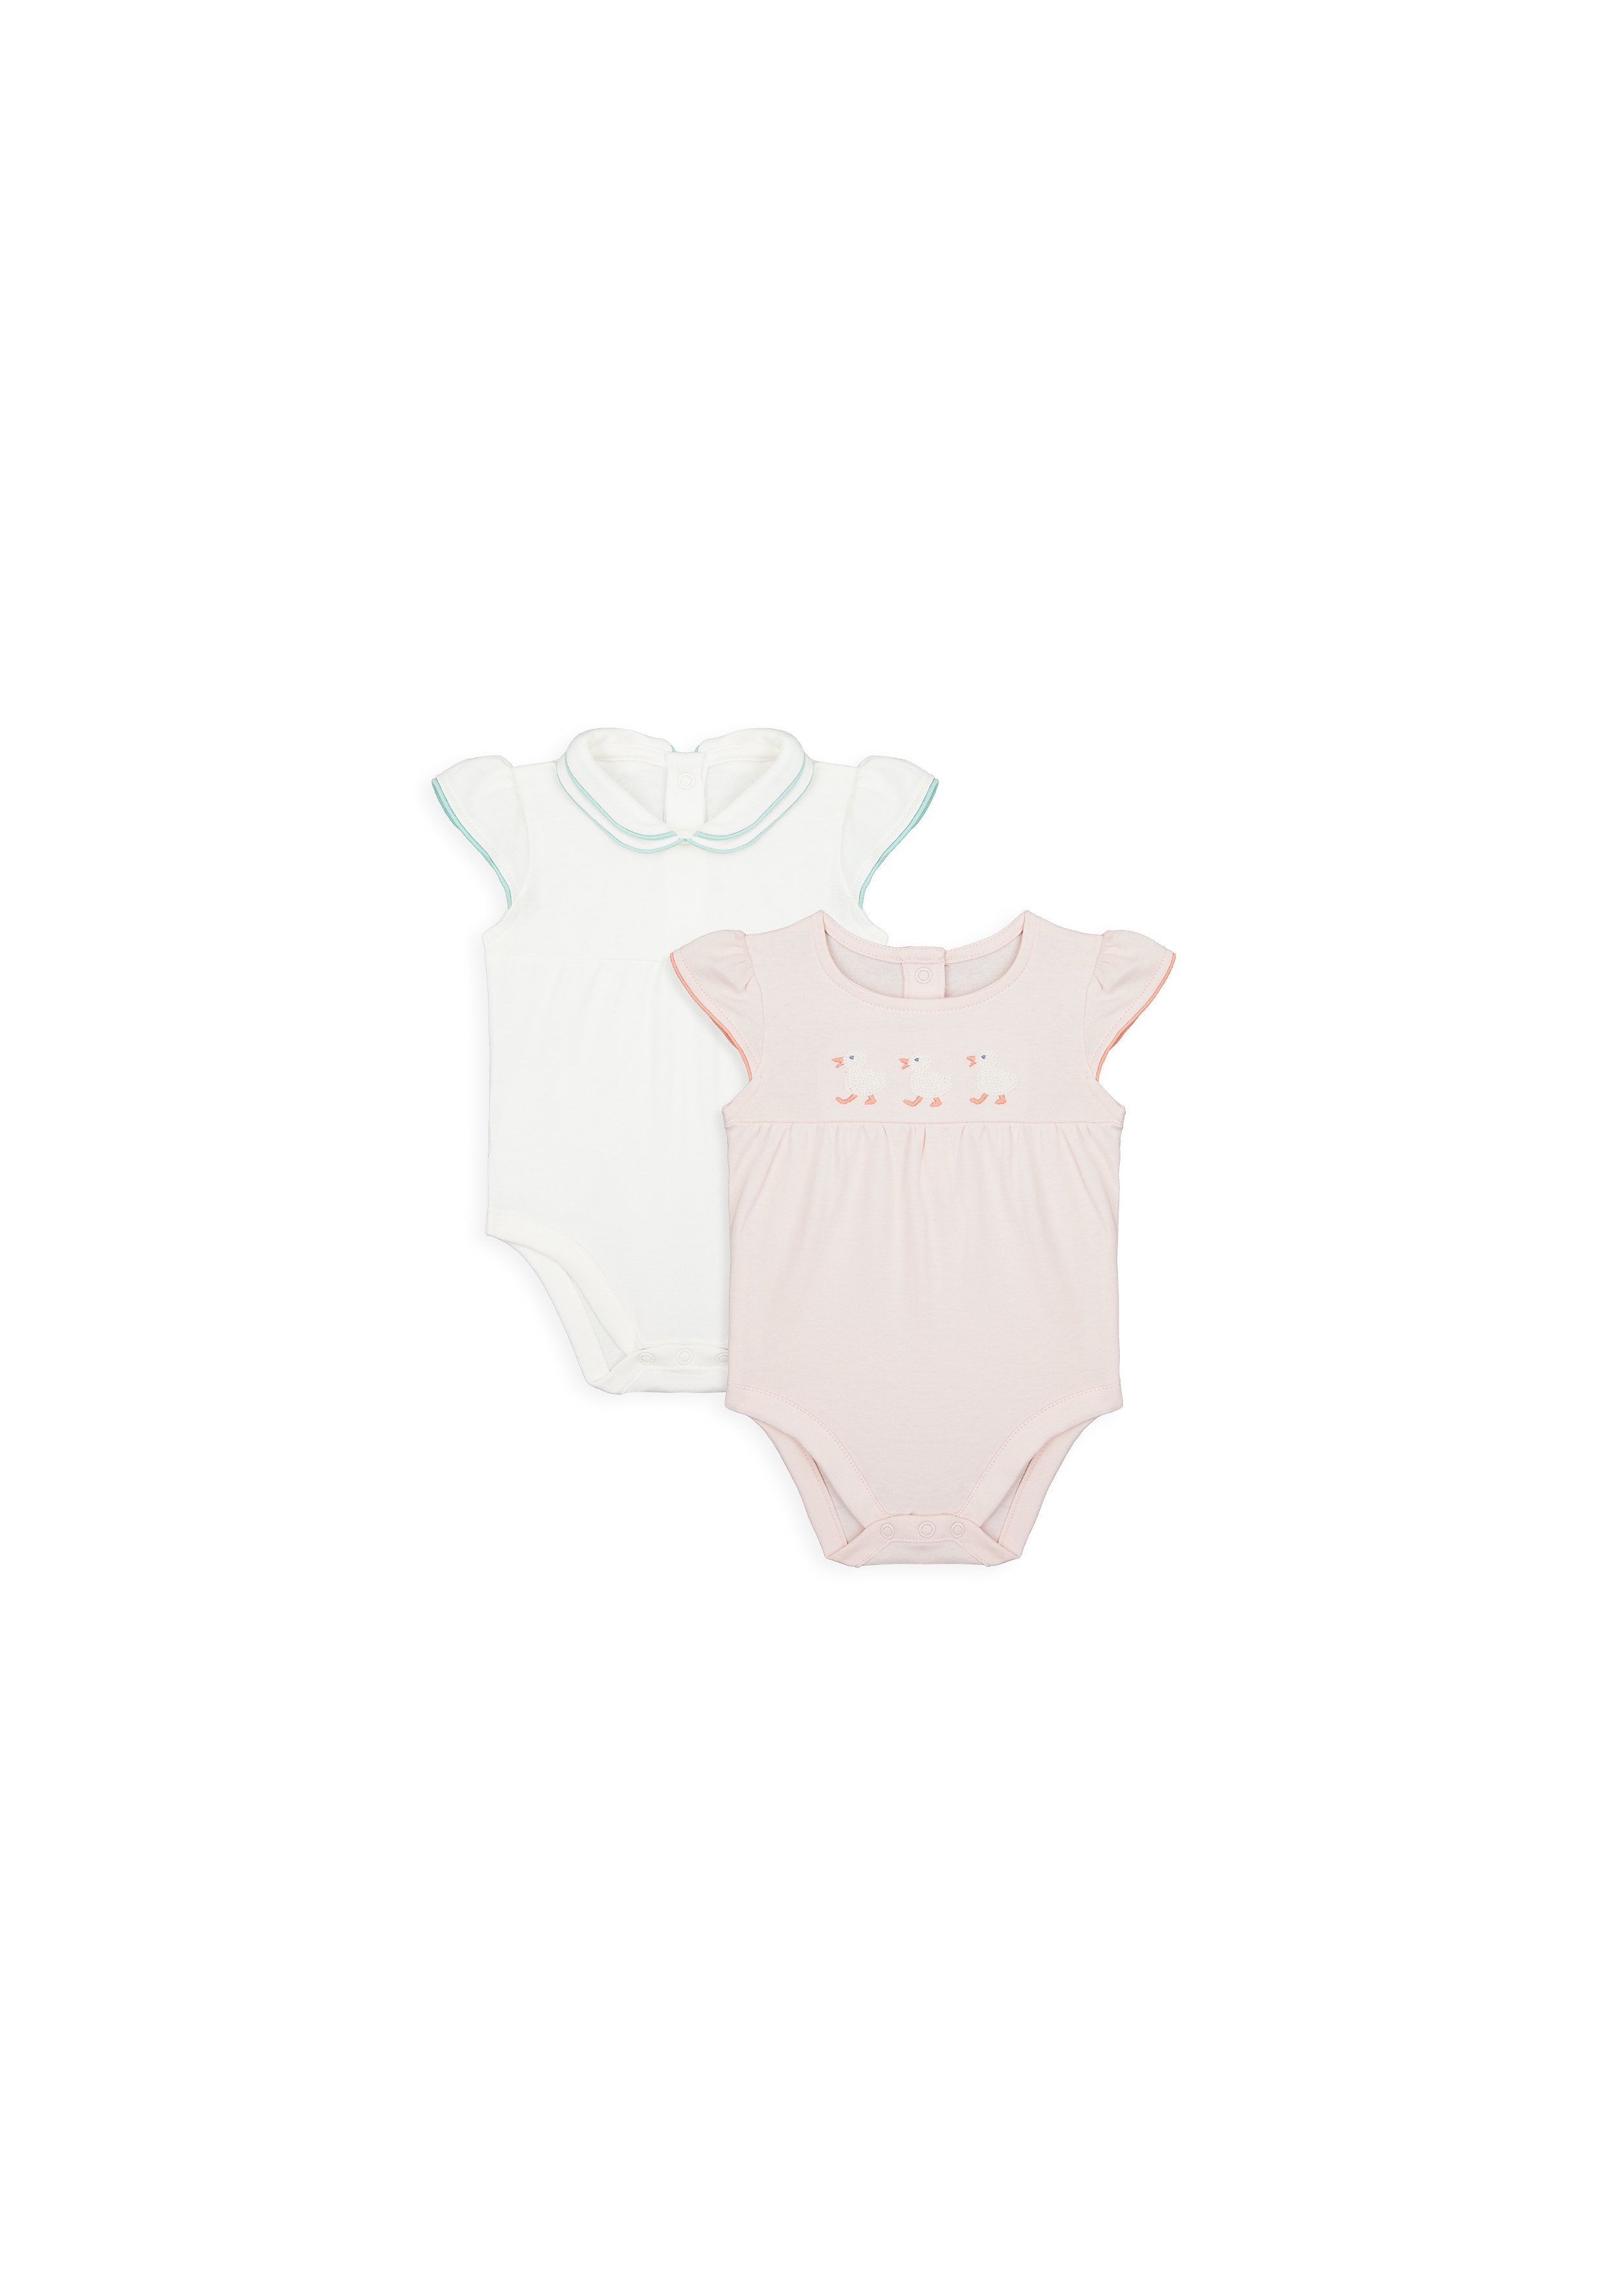 Mothercare | Girls Half Sleeves Bodysuit Duck Embroidery - Pack Of 2 - Multicolor